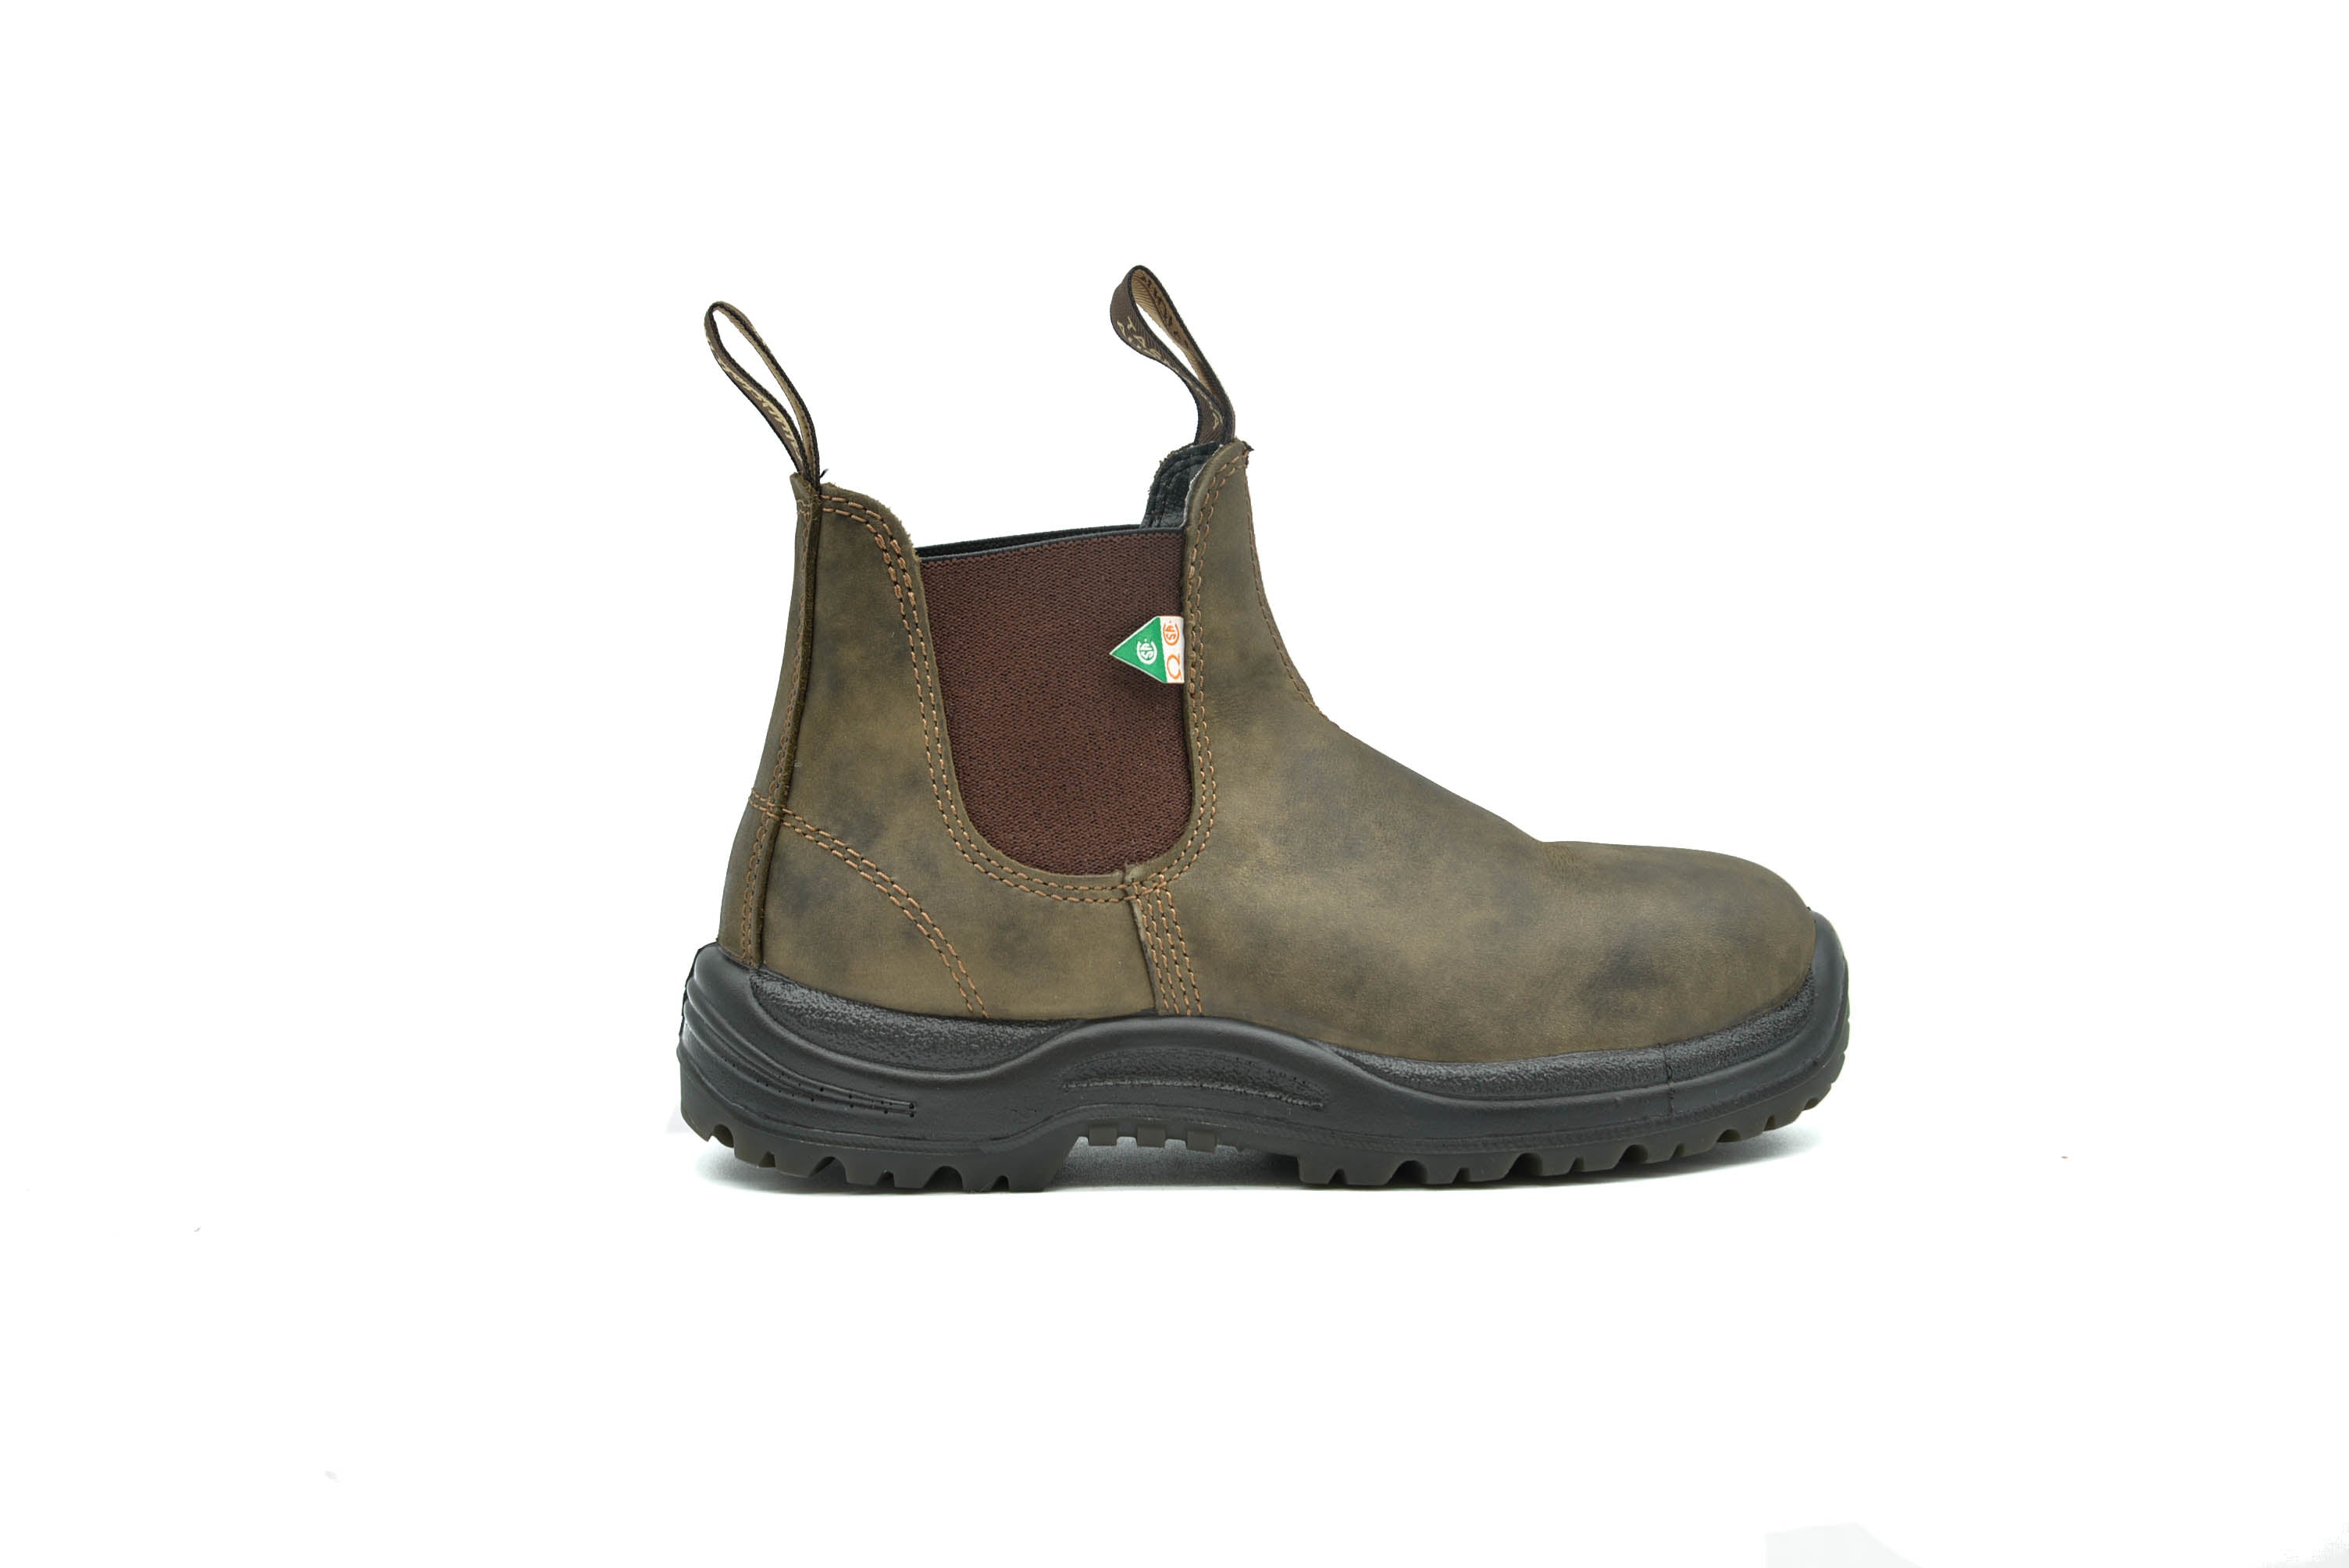 Blundstone Safety 180 Work &amp; Safety in New Waxy Rustic Brown